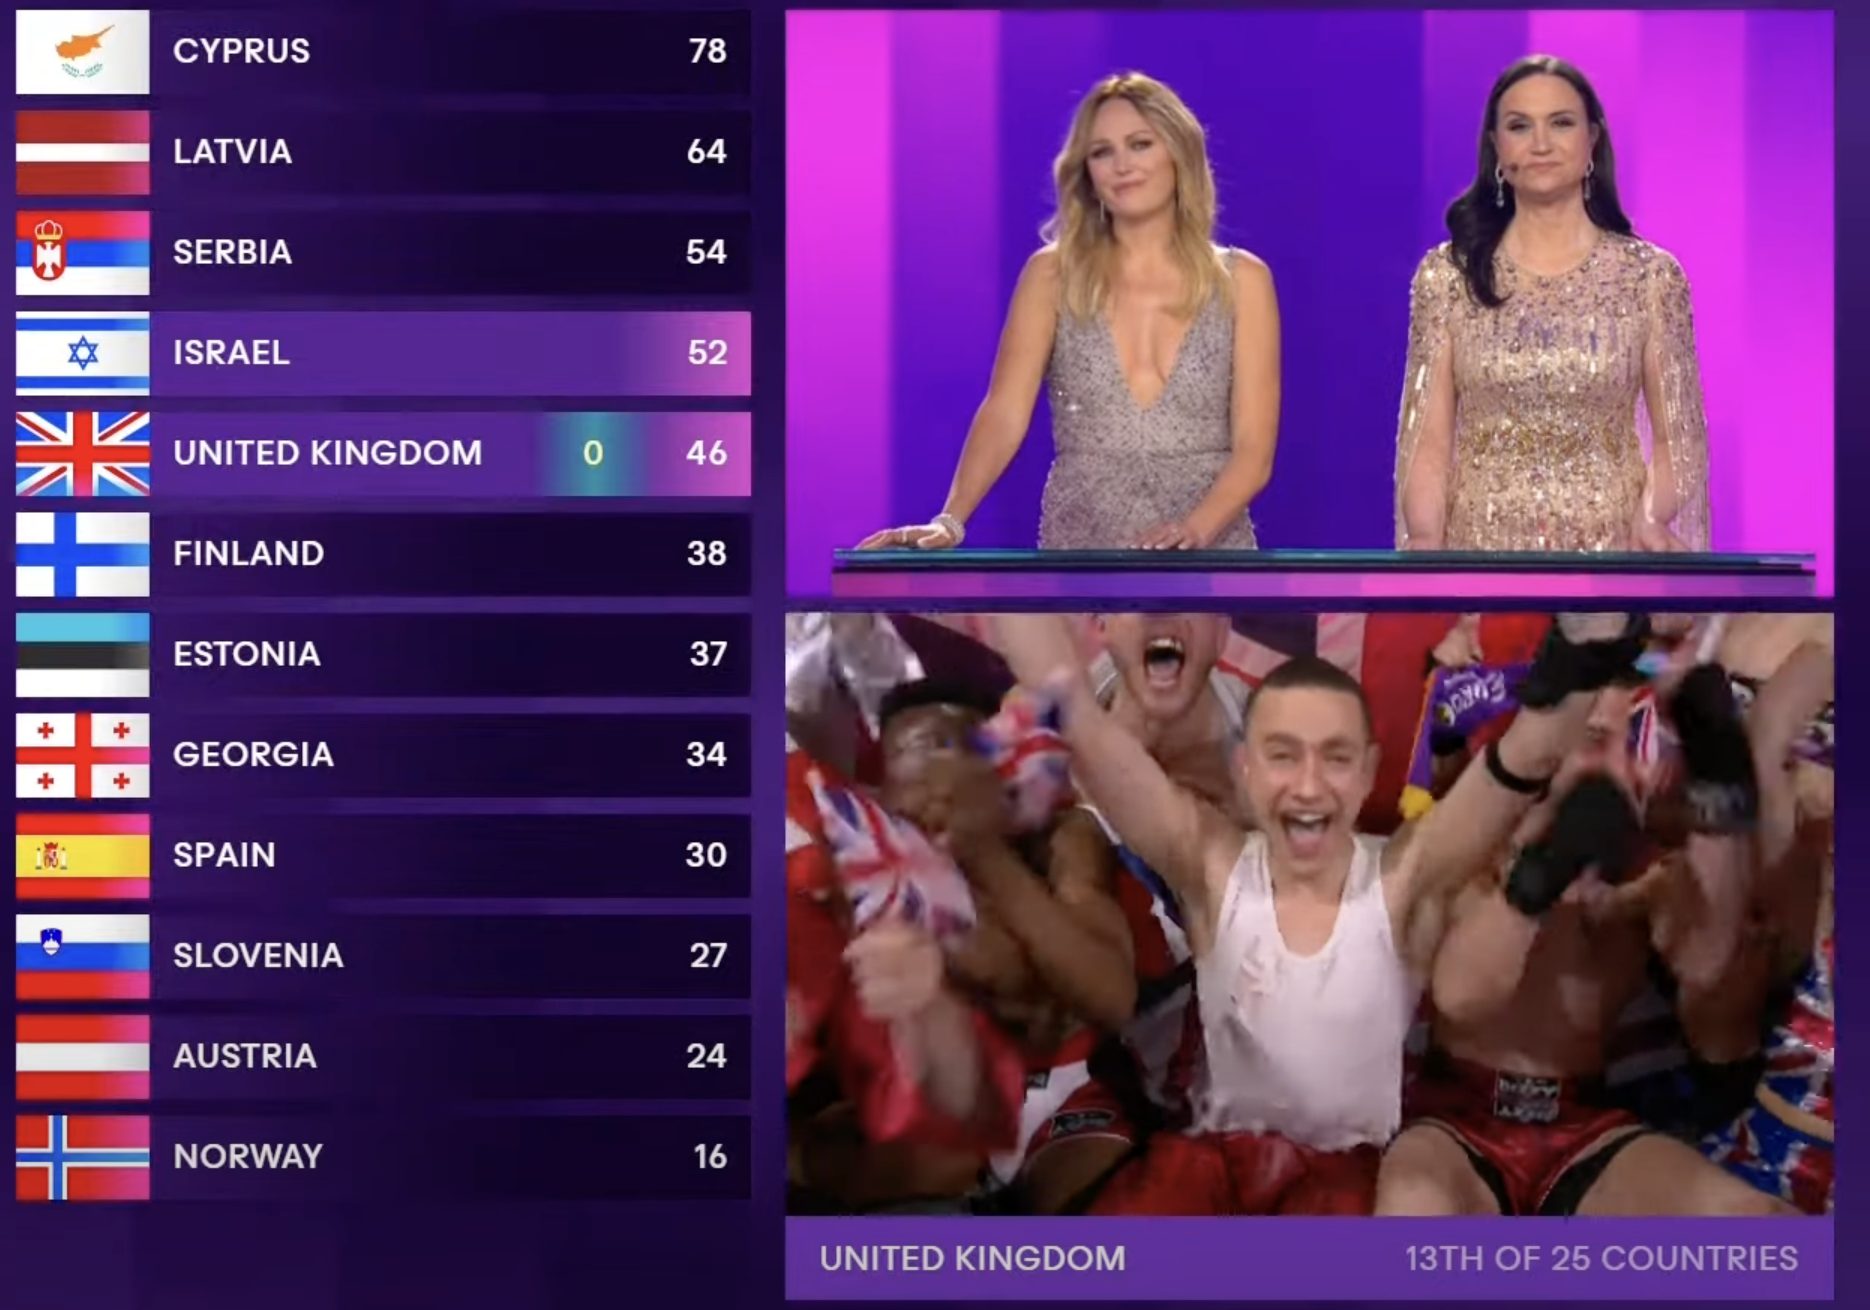 Germany is the most unlucky: which countries received 0 votes in the Eurovision final in the last 10 years